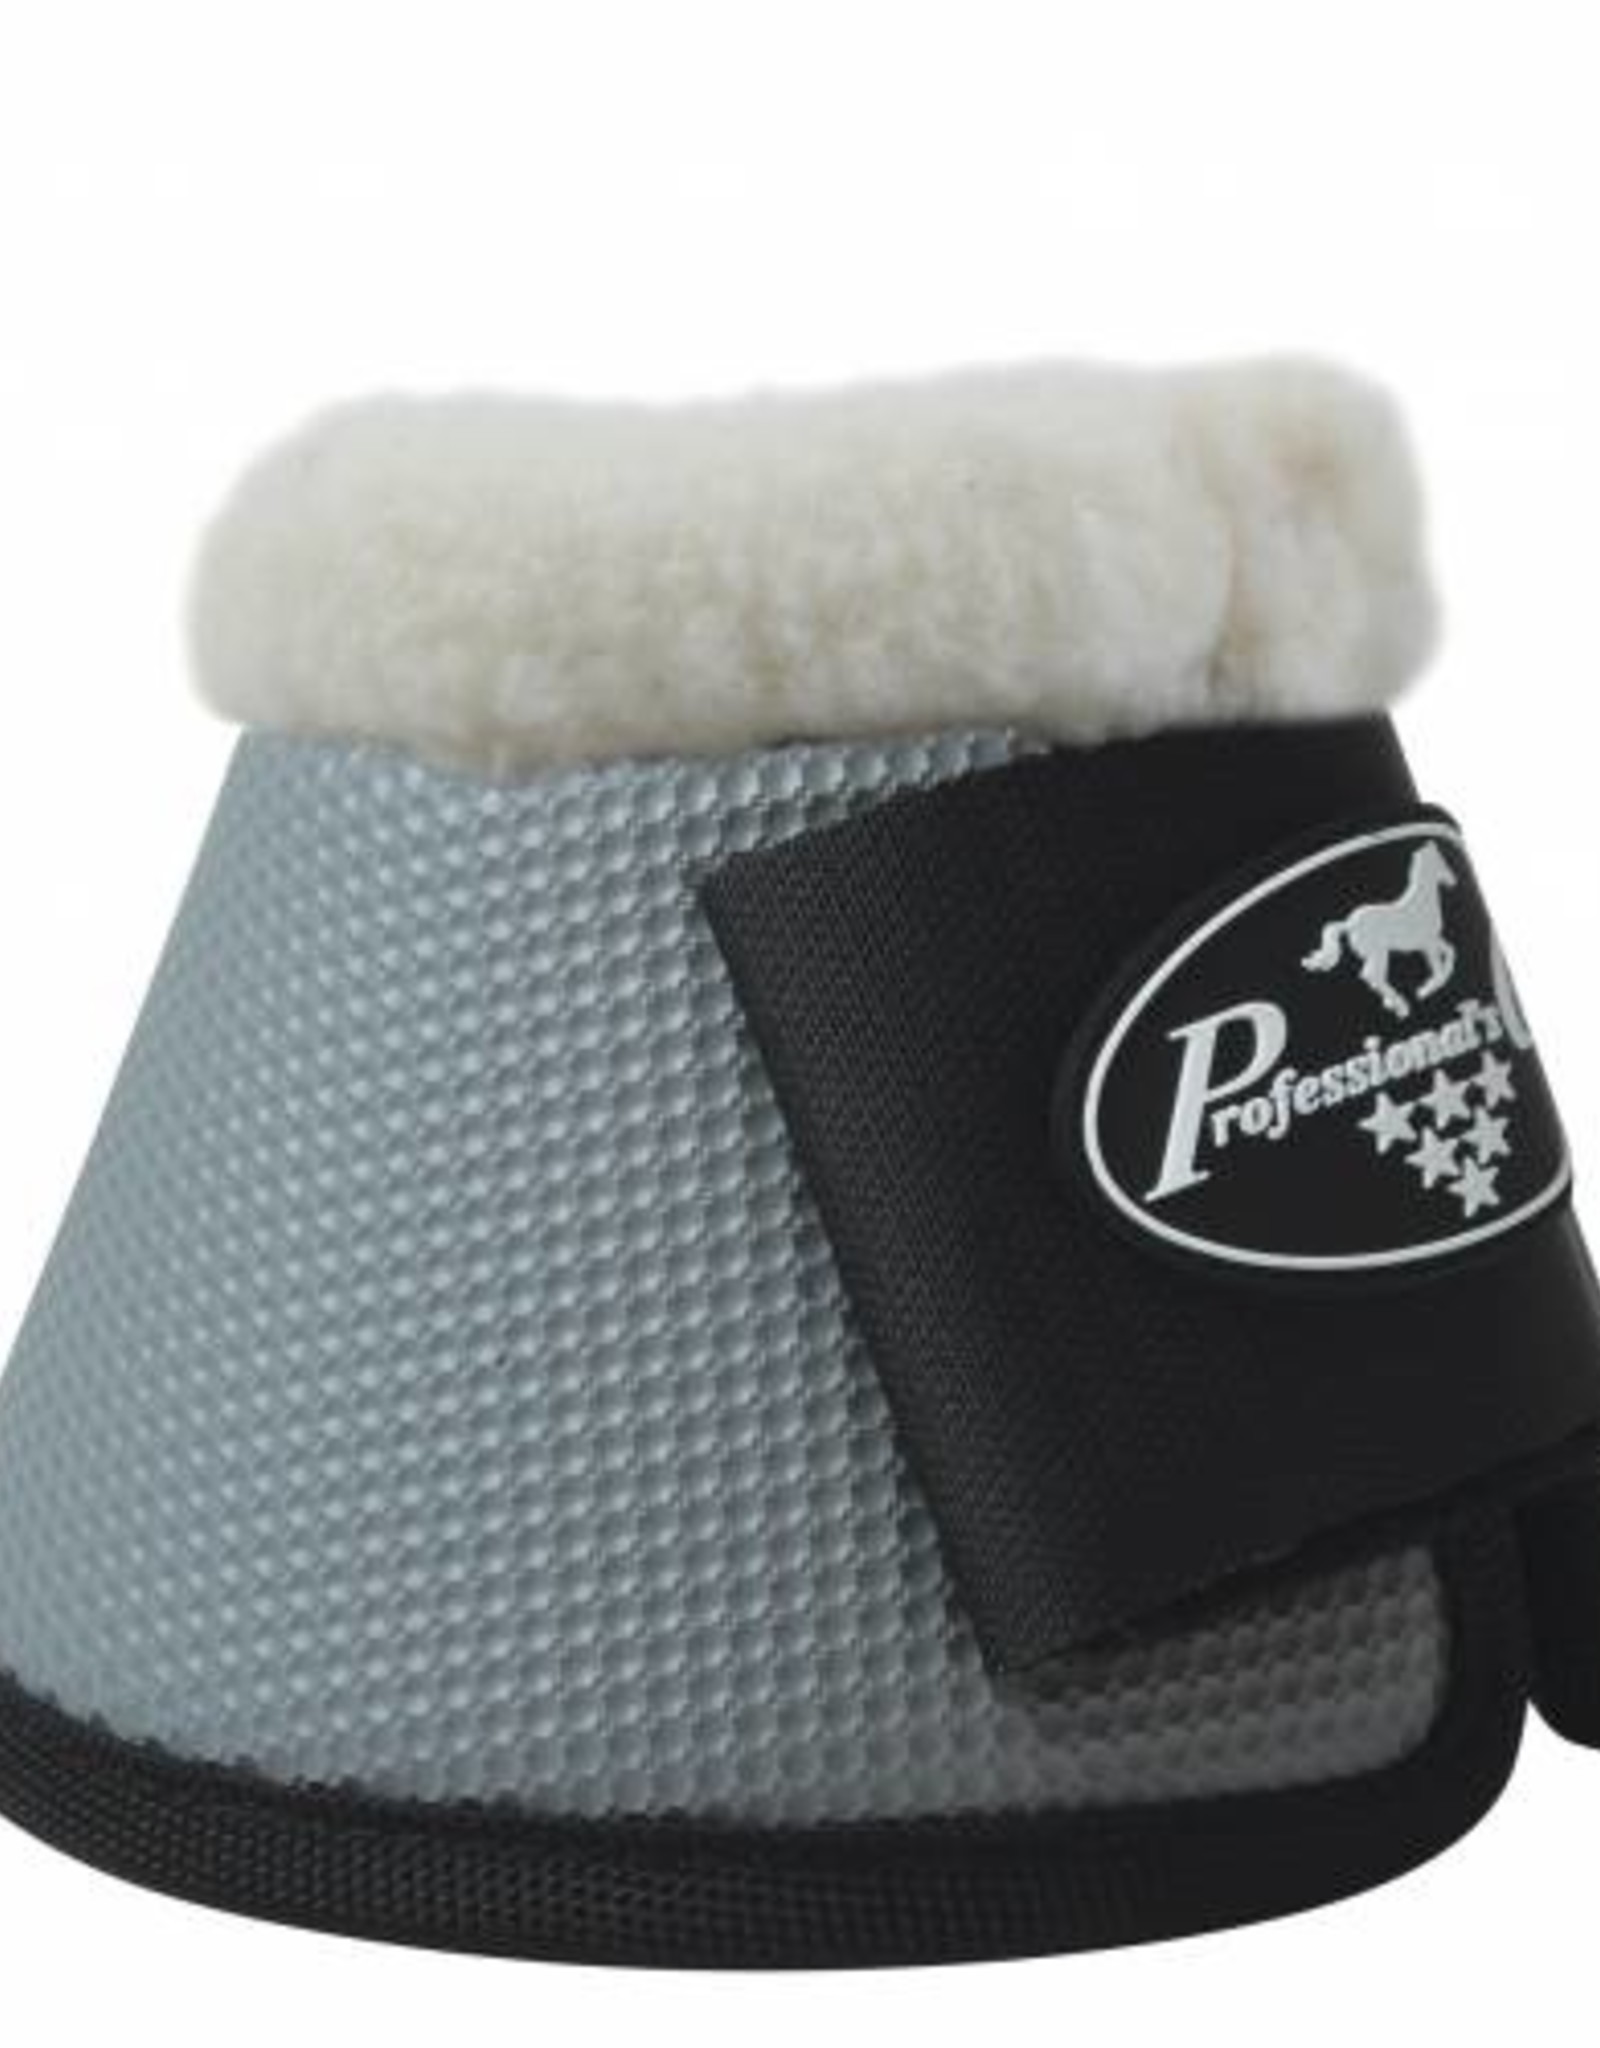 PROFESSIONAL'S CHOICE ALL PURPOSE BELL BOOT WITH FLEECE